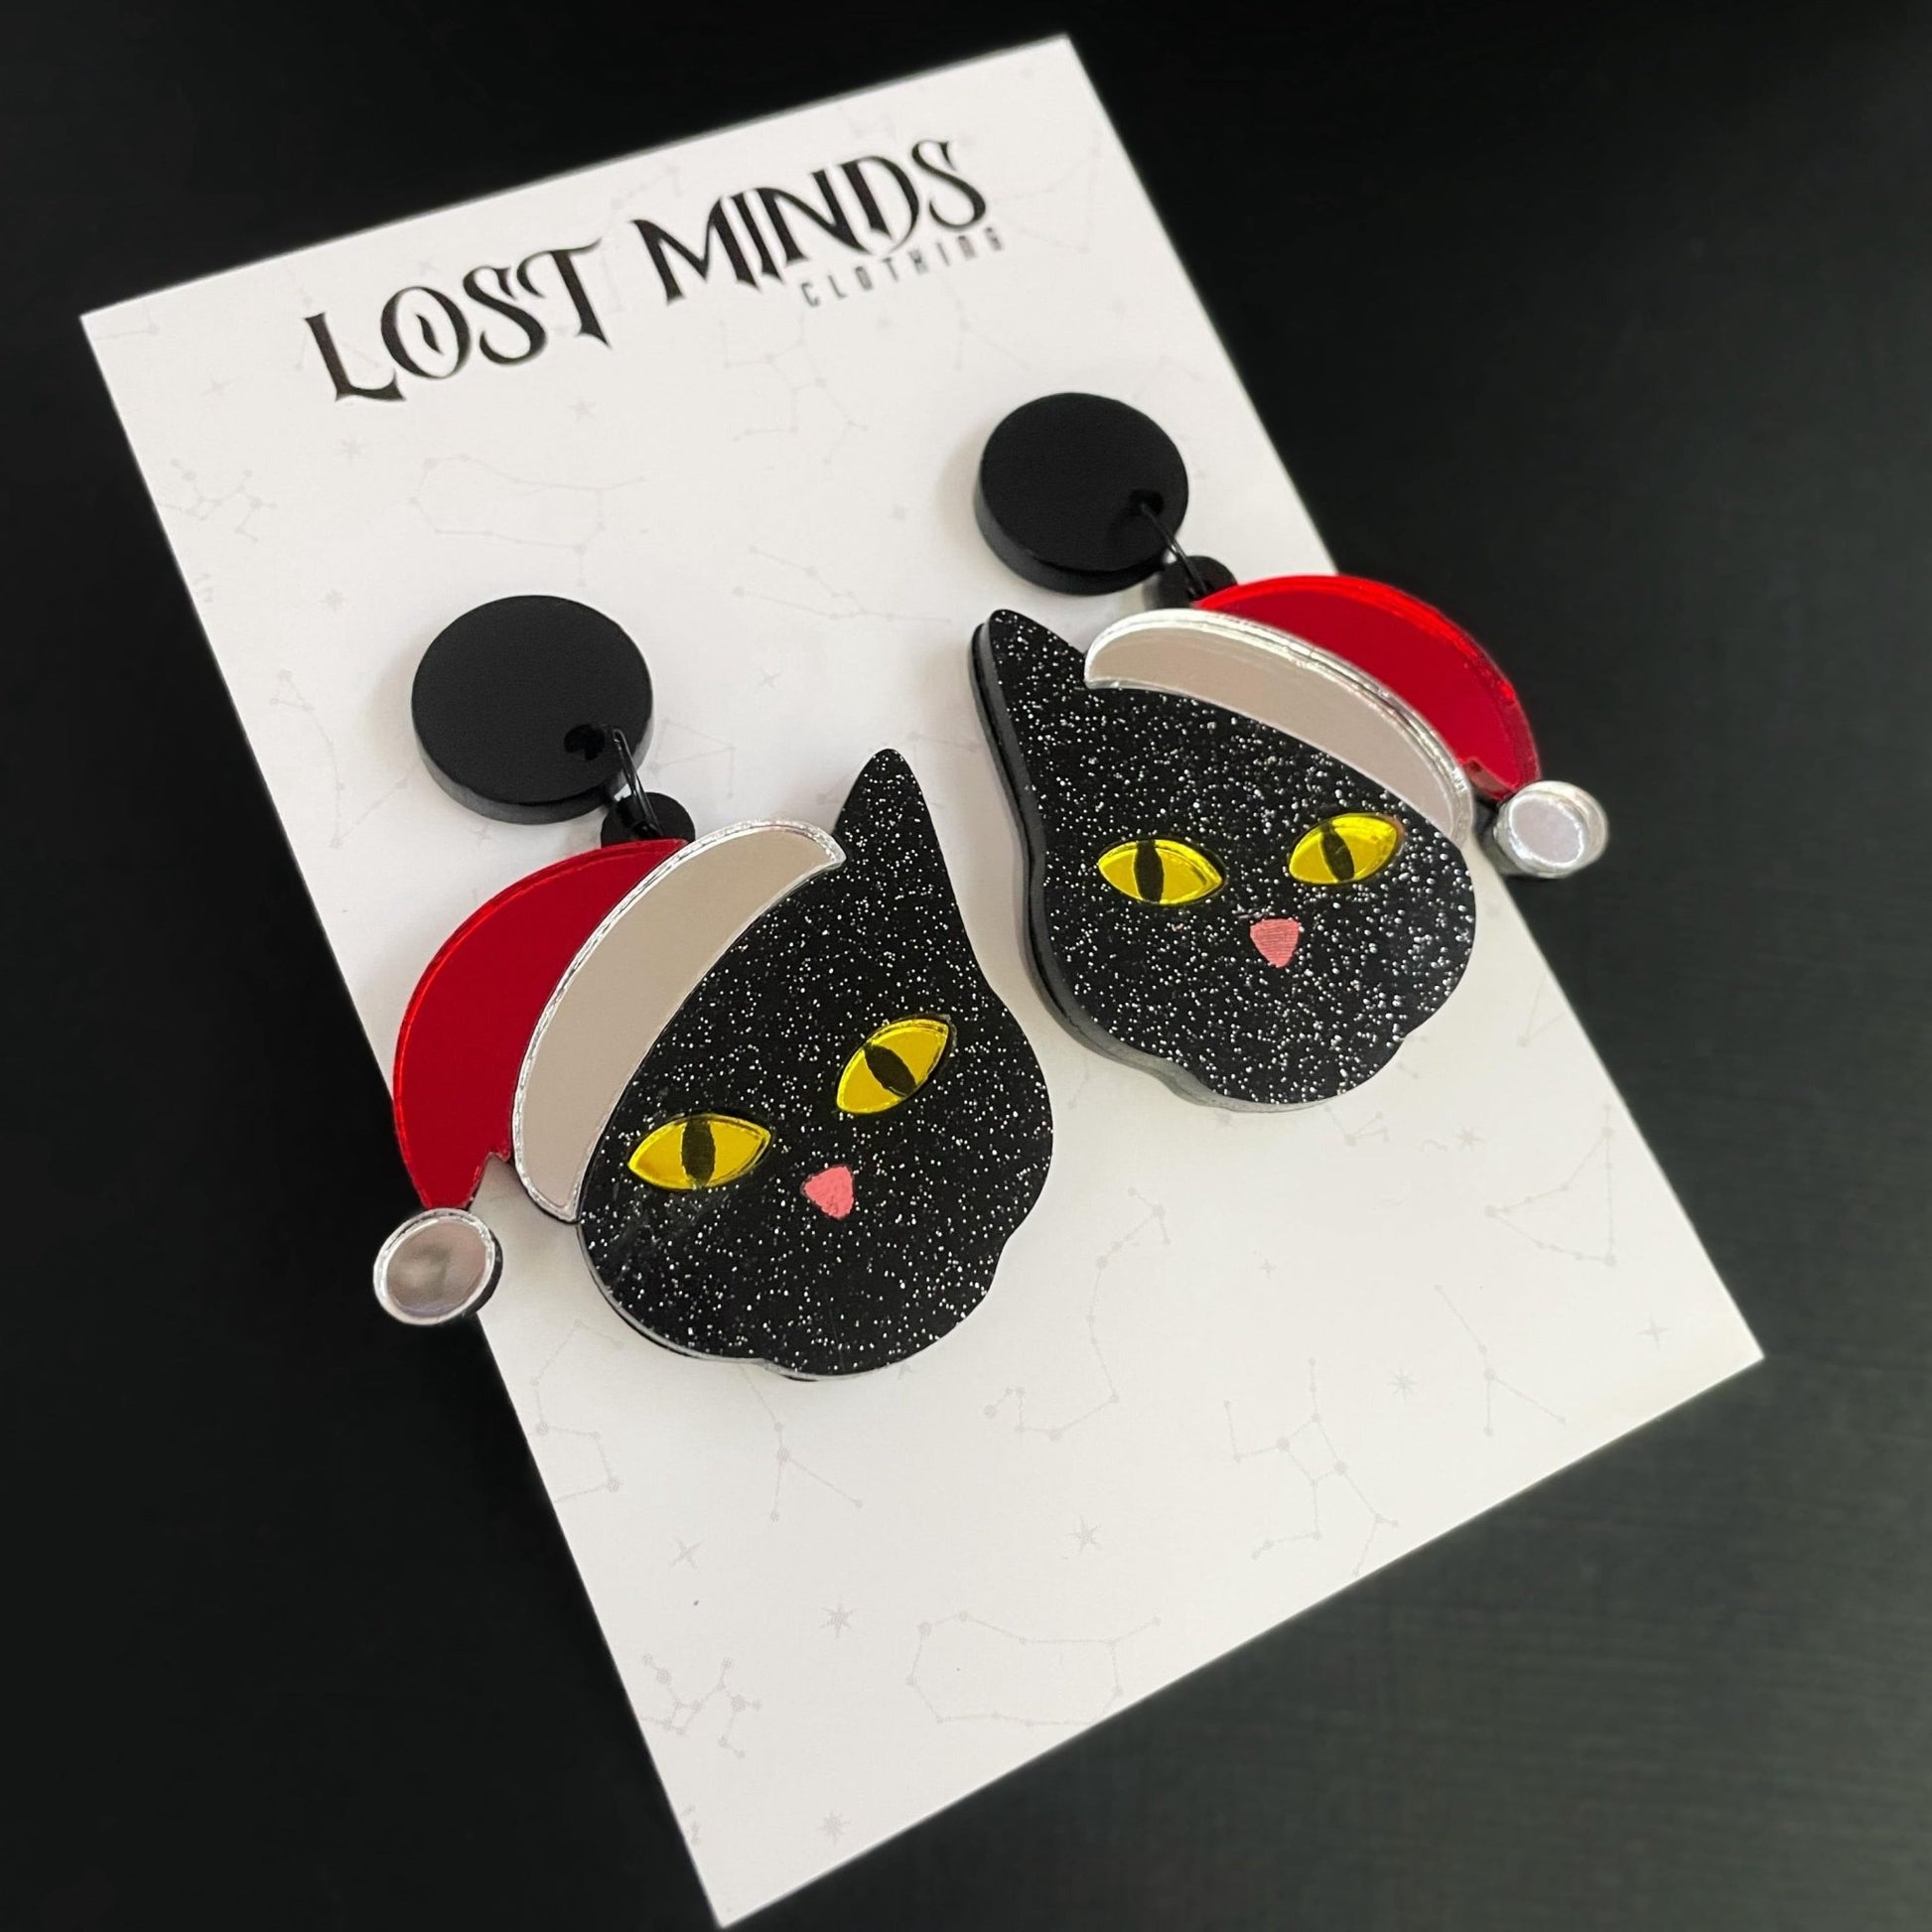 Chrissy Cat Earrings - Lost Minds Clothing